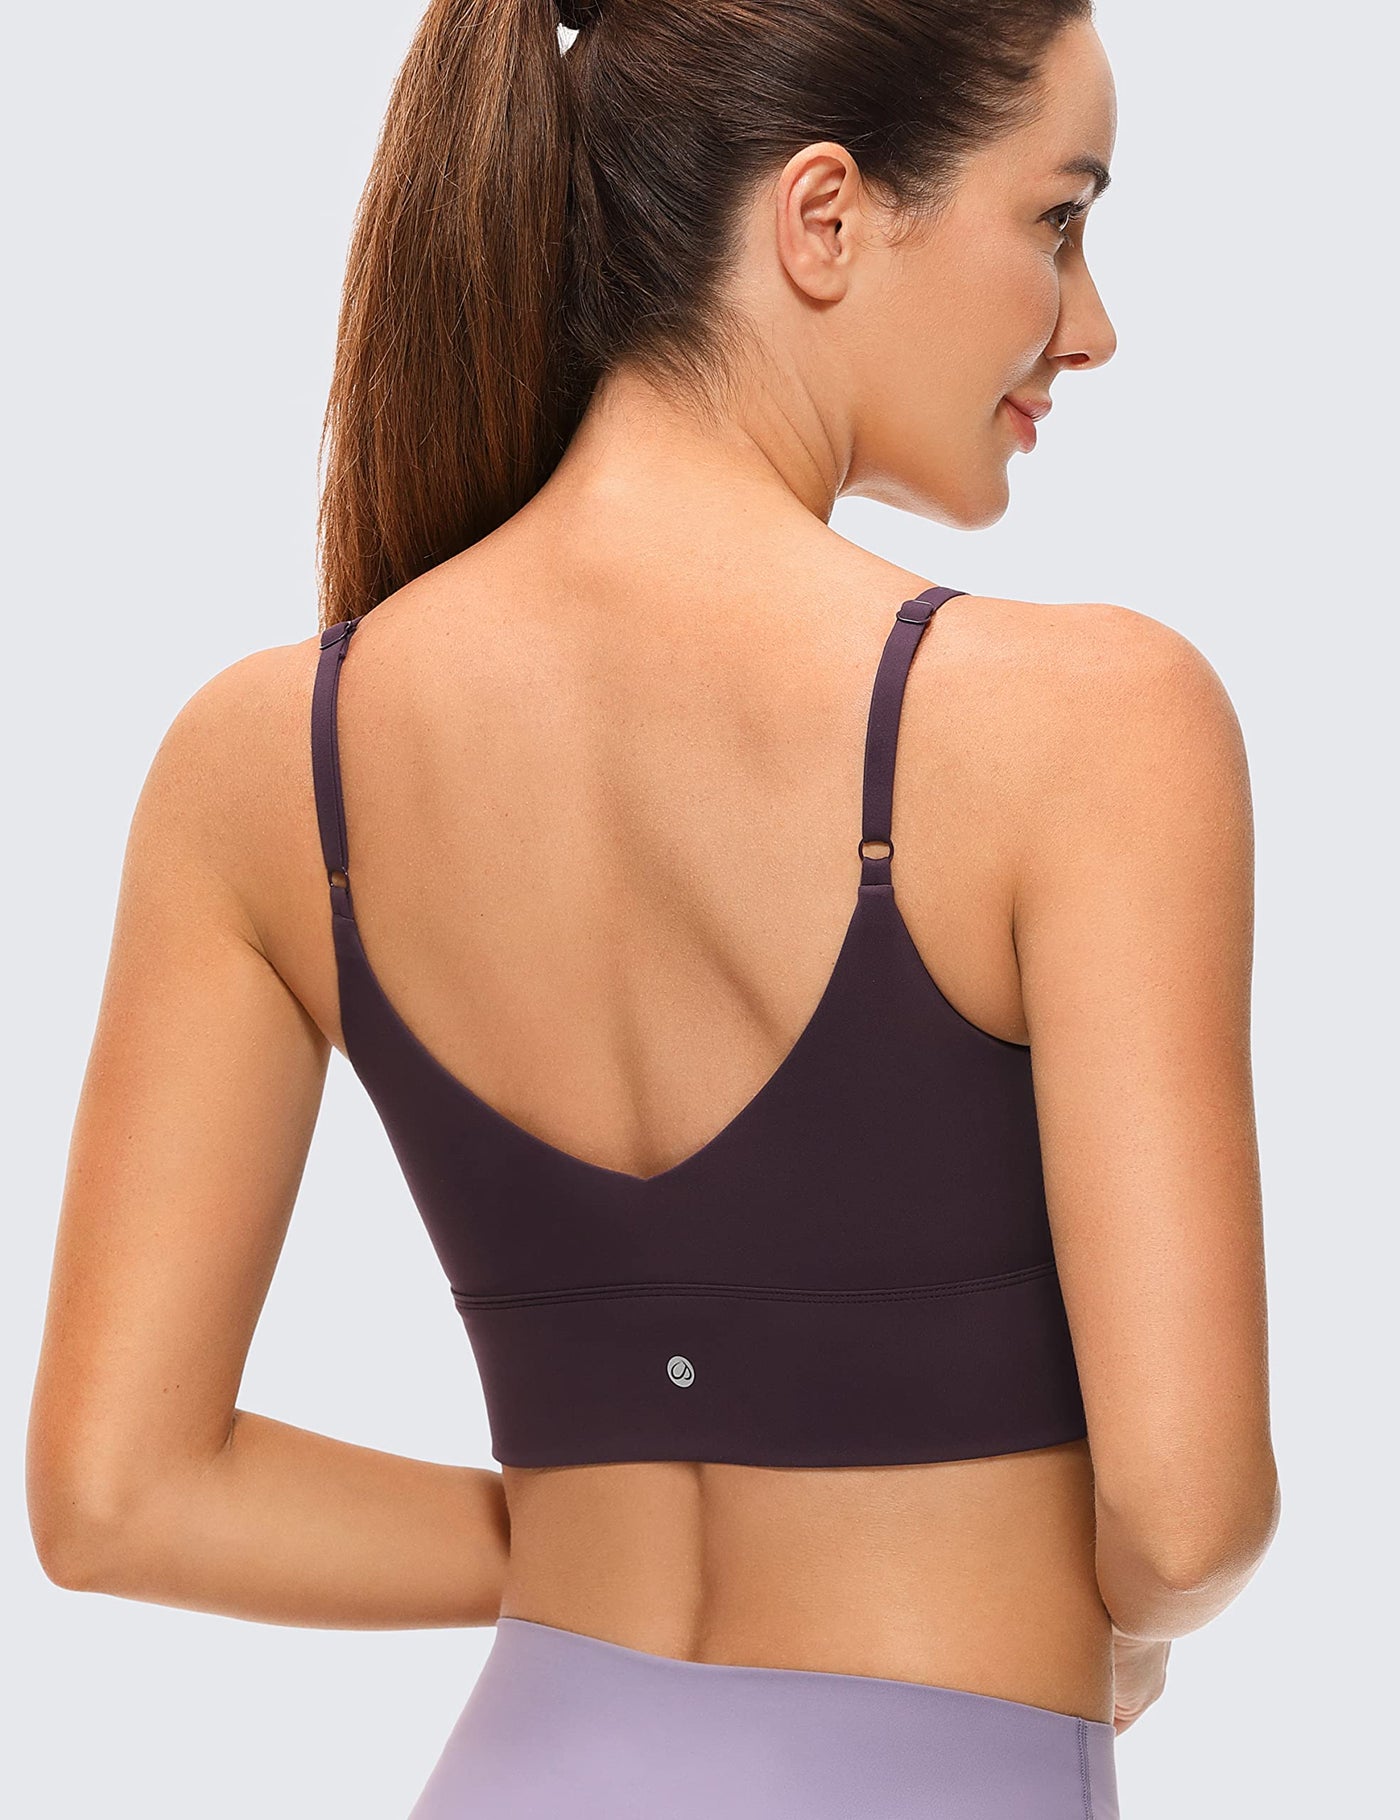 CRZ YOGA Strappy Padded Sports Bra for Women Activewear Medium Support Workout  Yoga Bra Tops